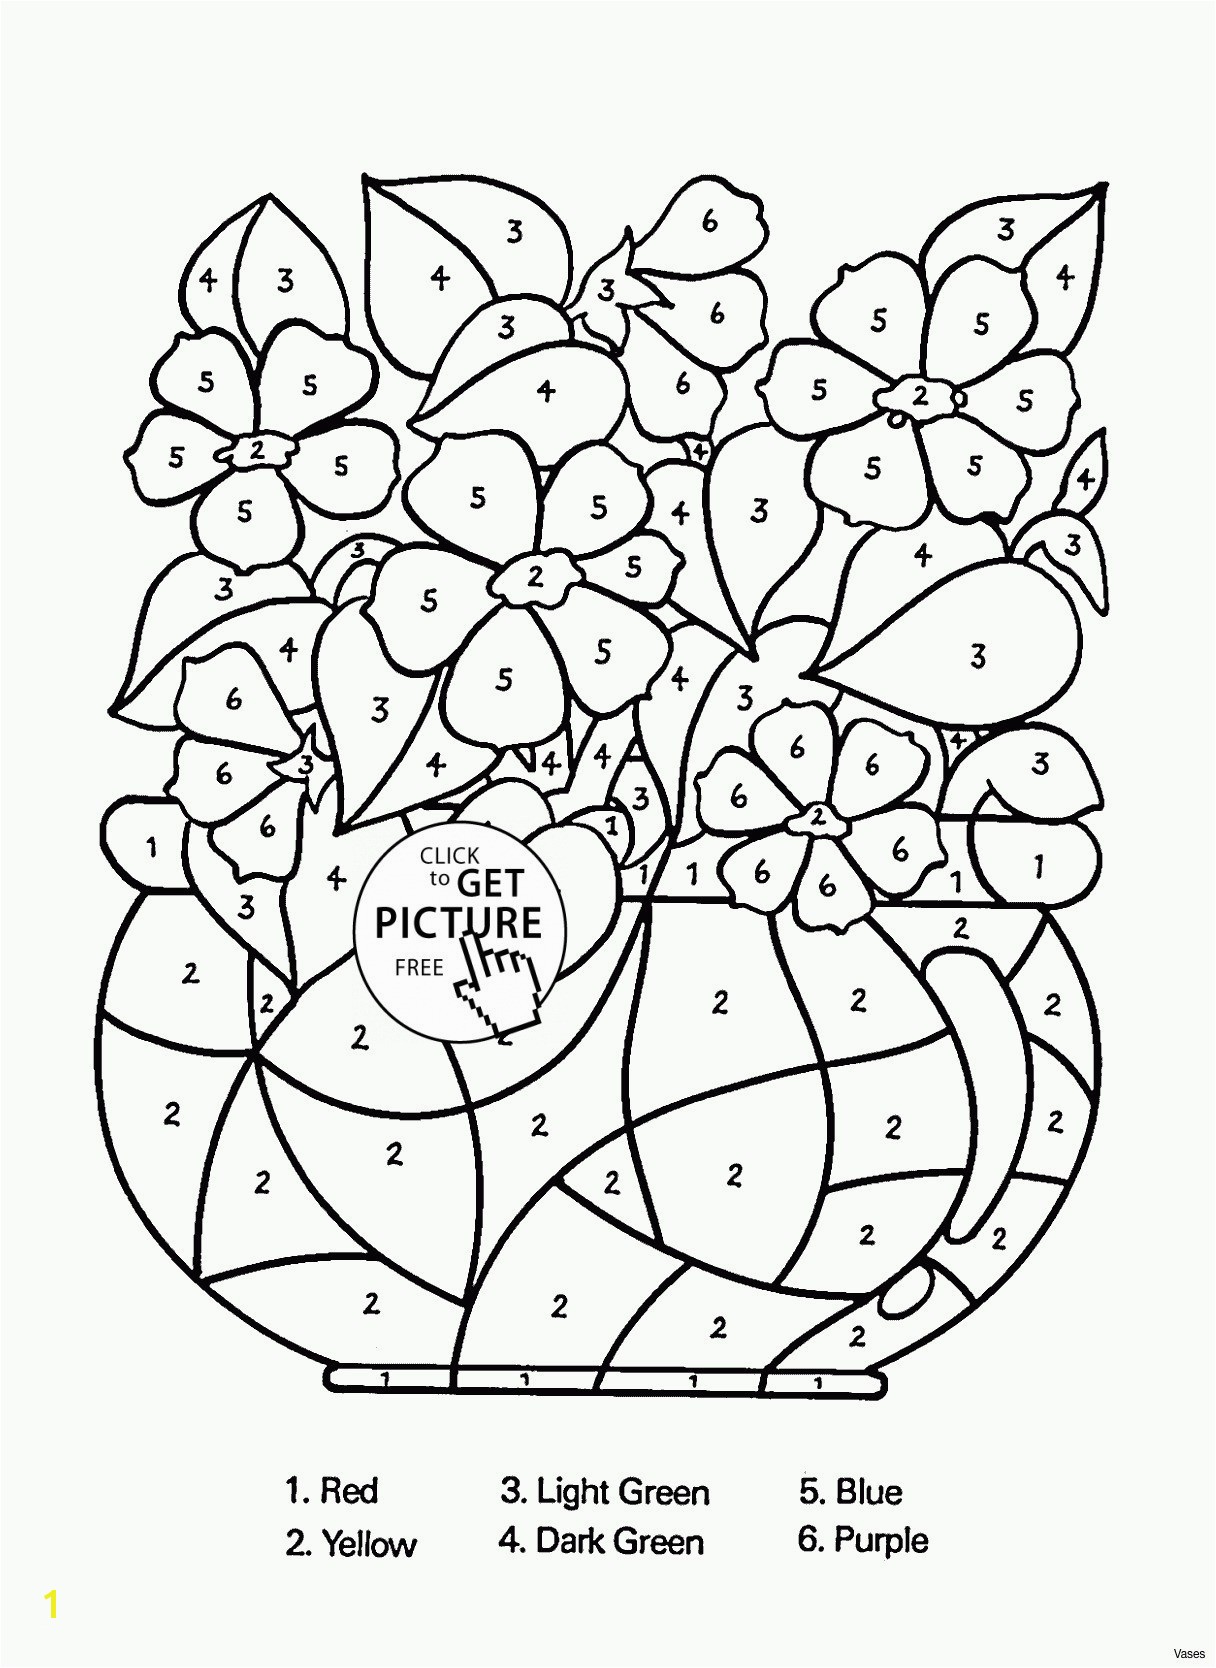 Aztec Pattern Coloring Pages Aztec Coloring Pages Free Printable Coloring Pages for Kids